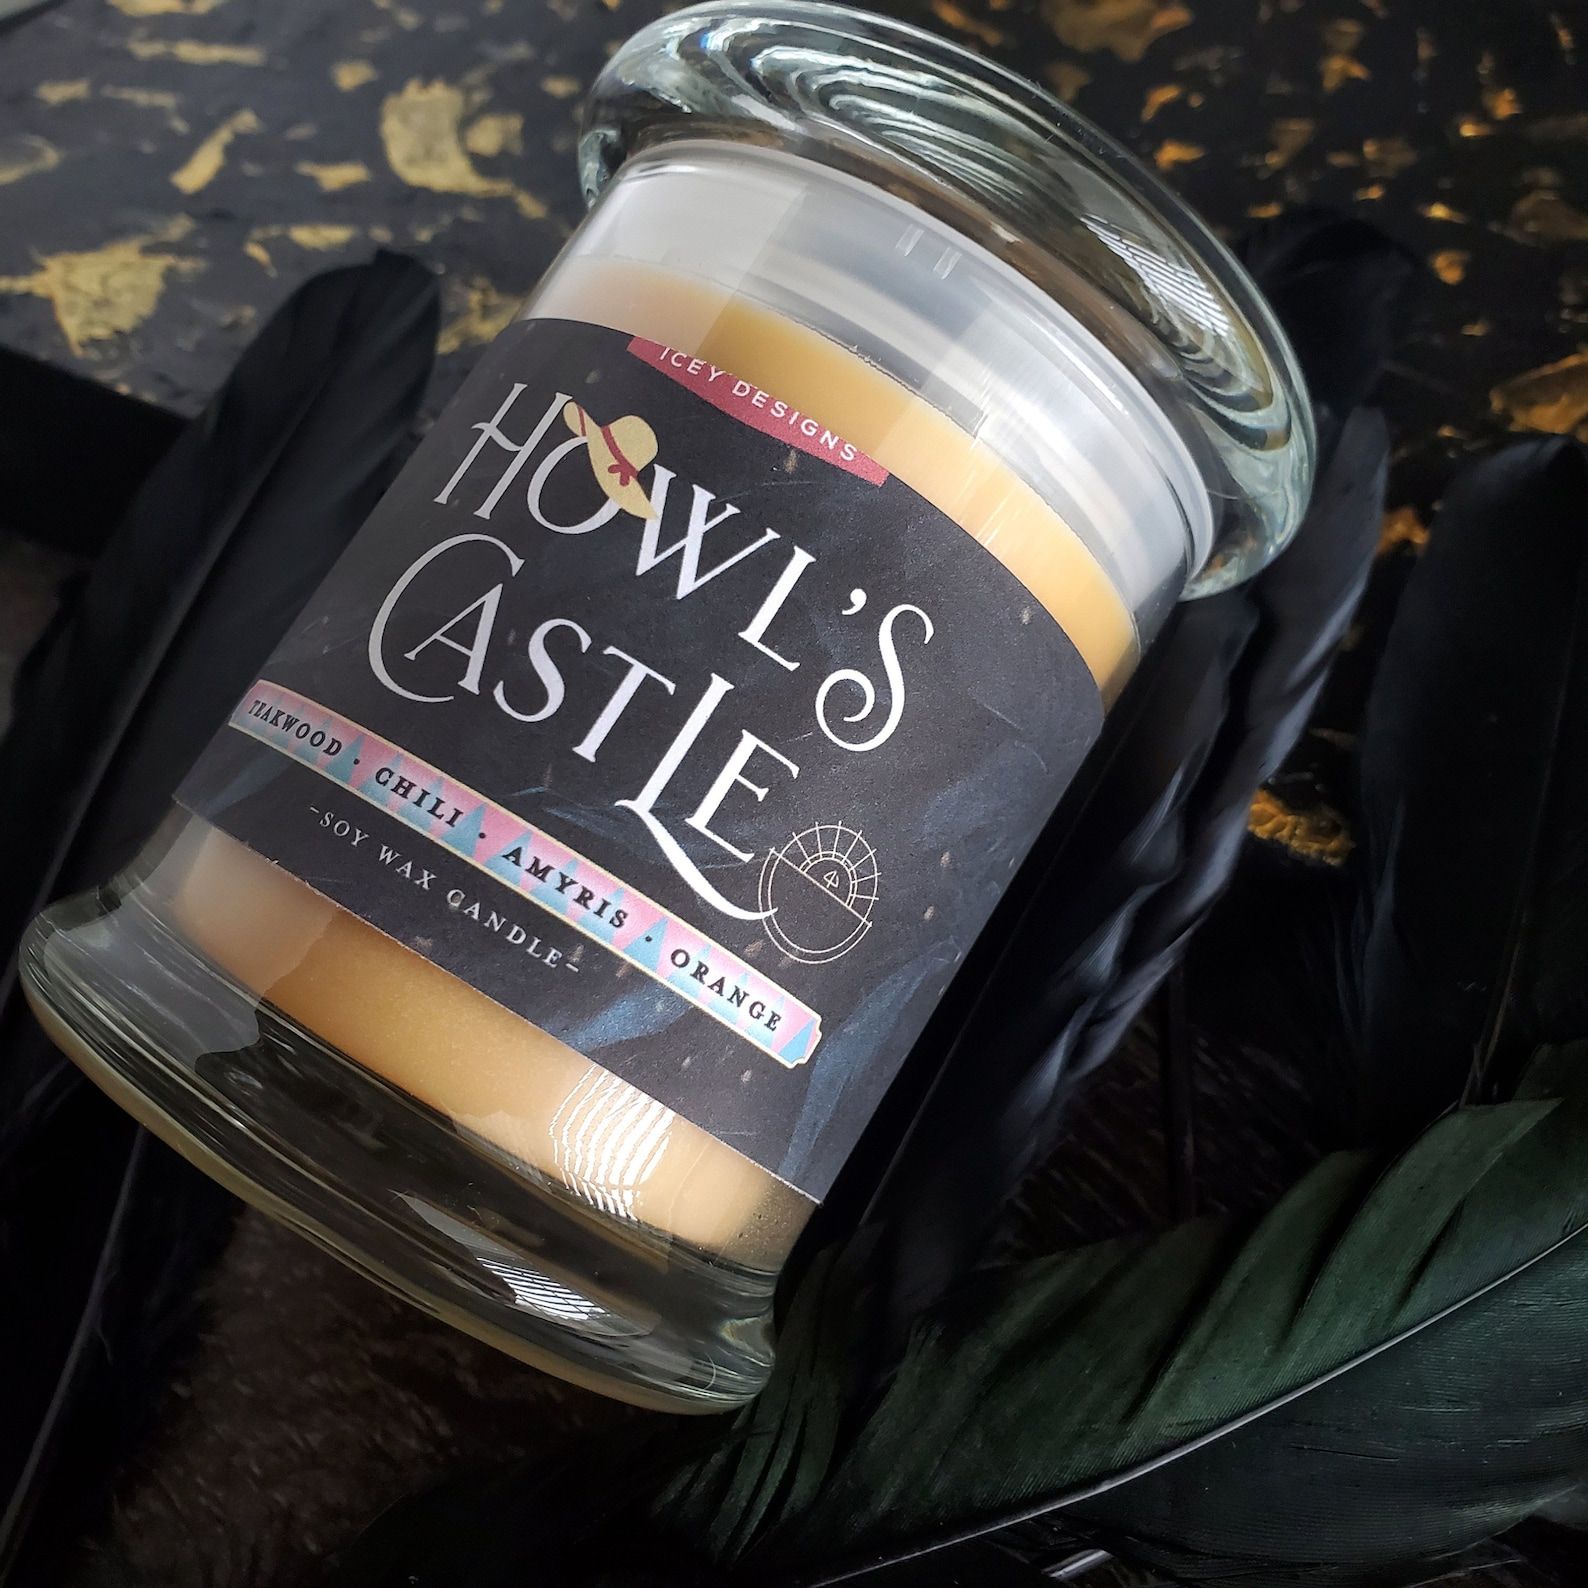 A glass jar holding a tan candle with a label that says "Howl's Castle"